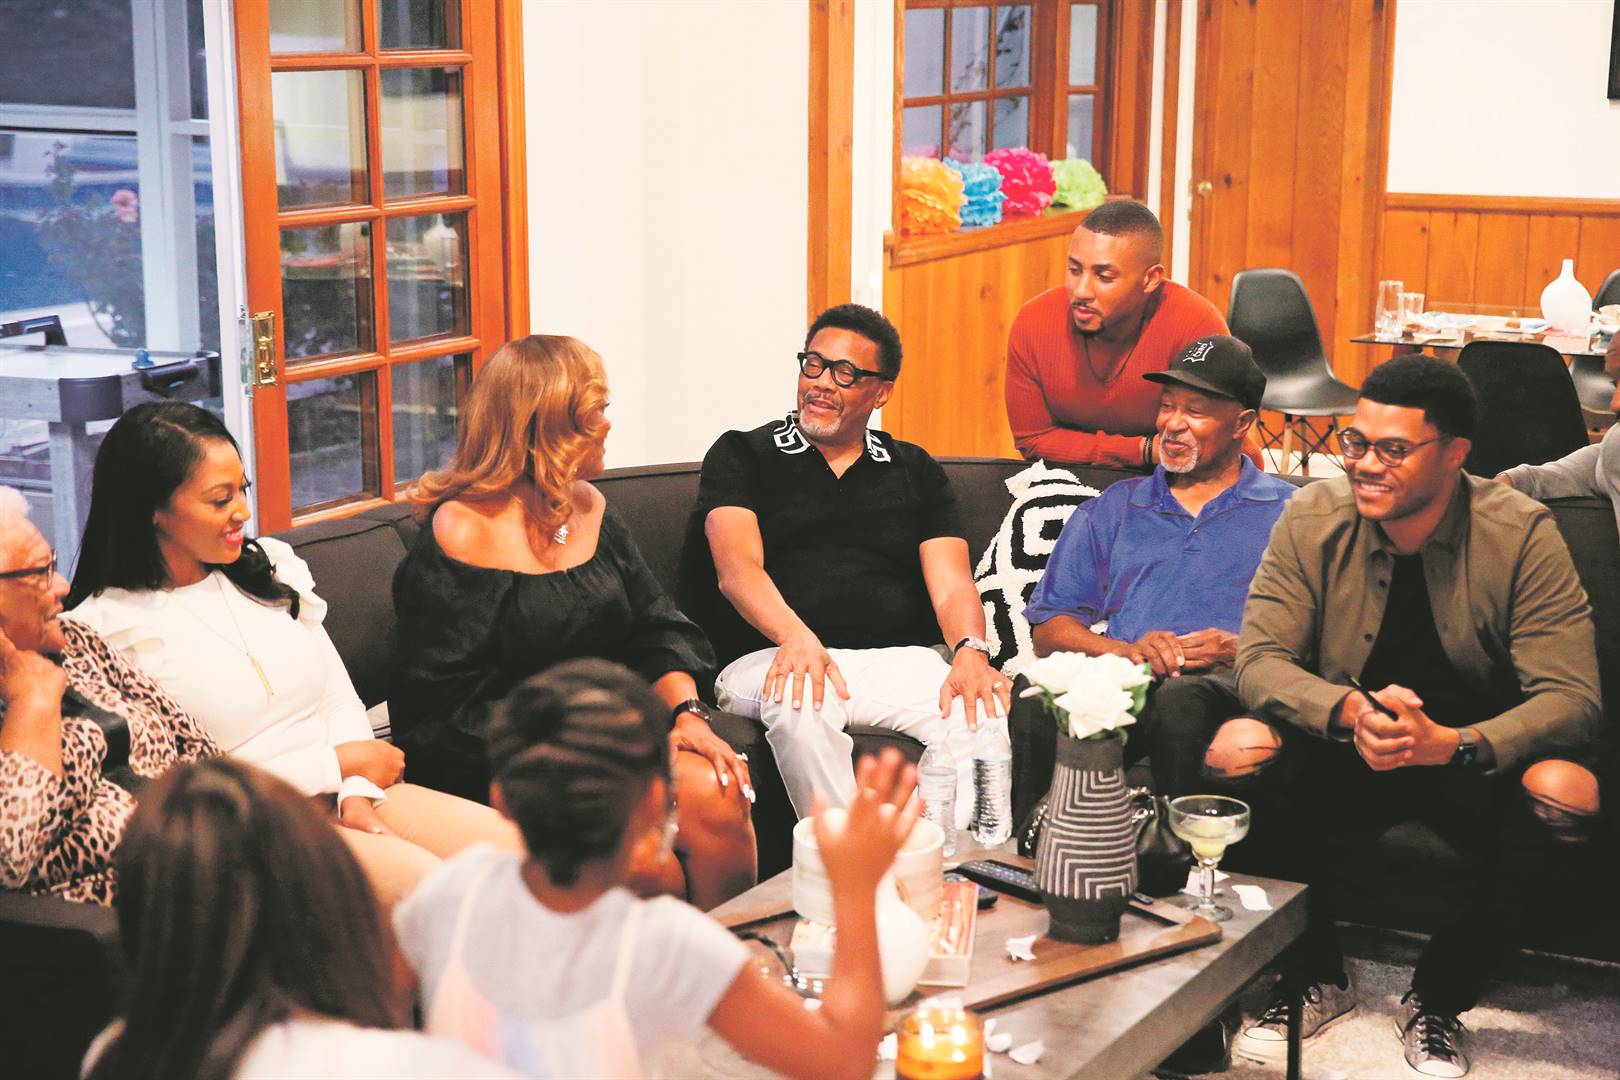 Family matters: Judge Greg Mathis is letting viewers into his home in a new reality series Photo: Jesse Grant / E! Entertainment